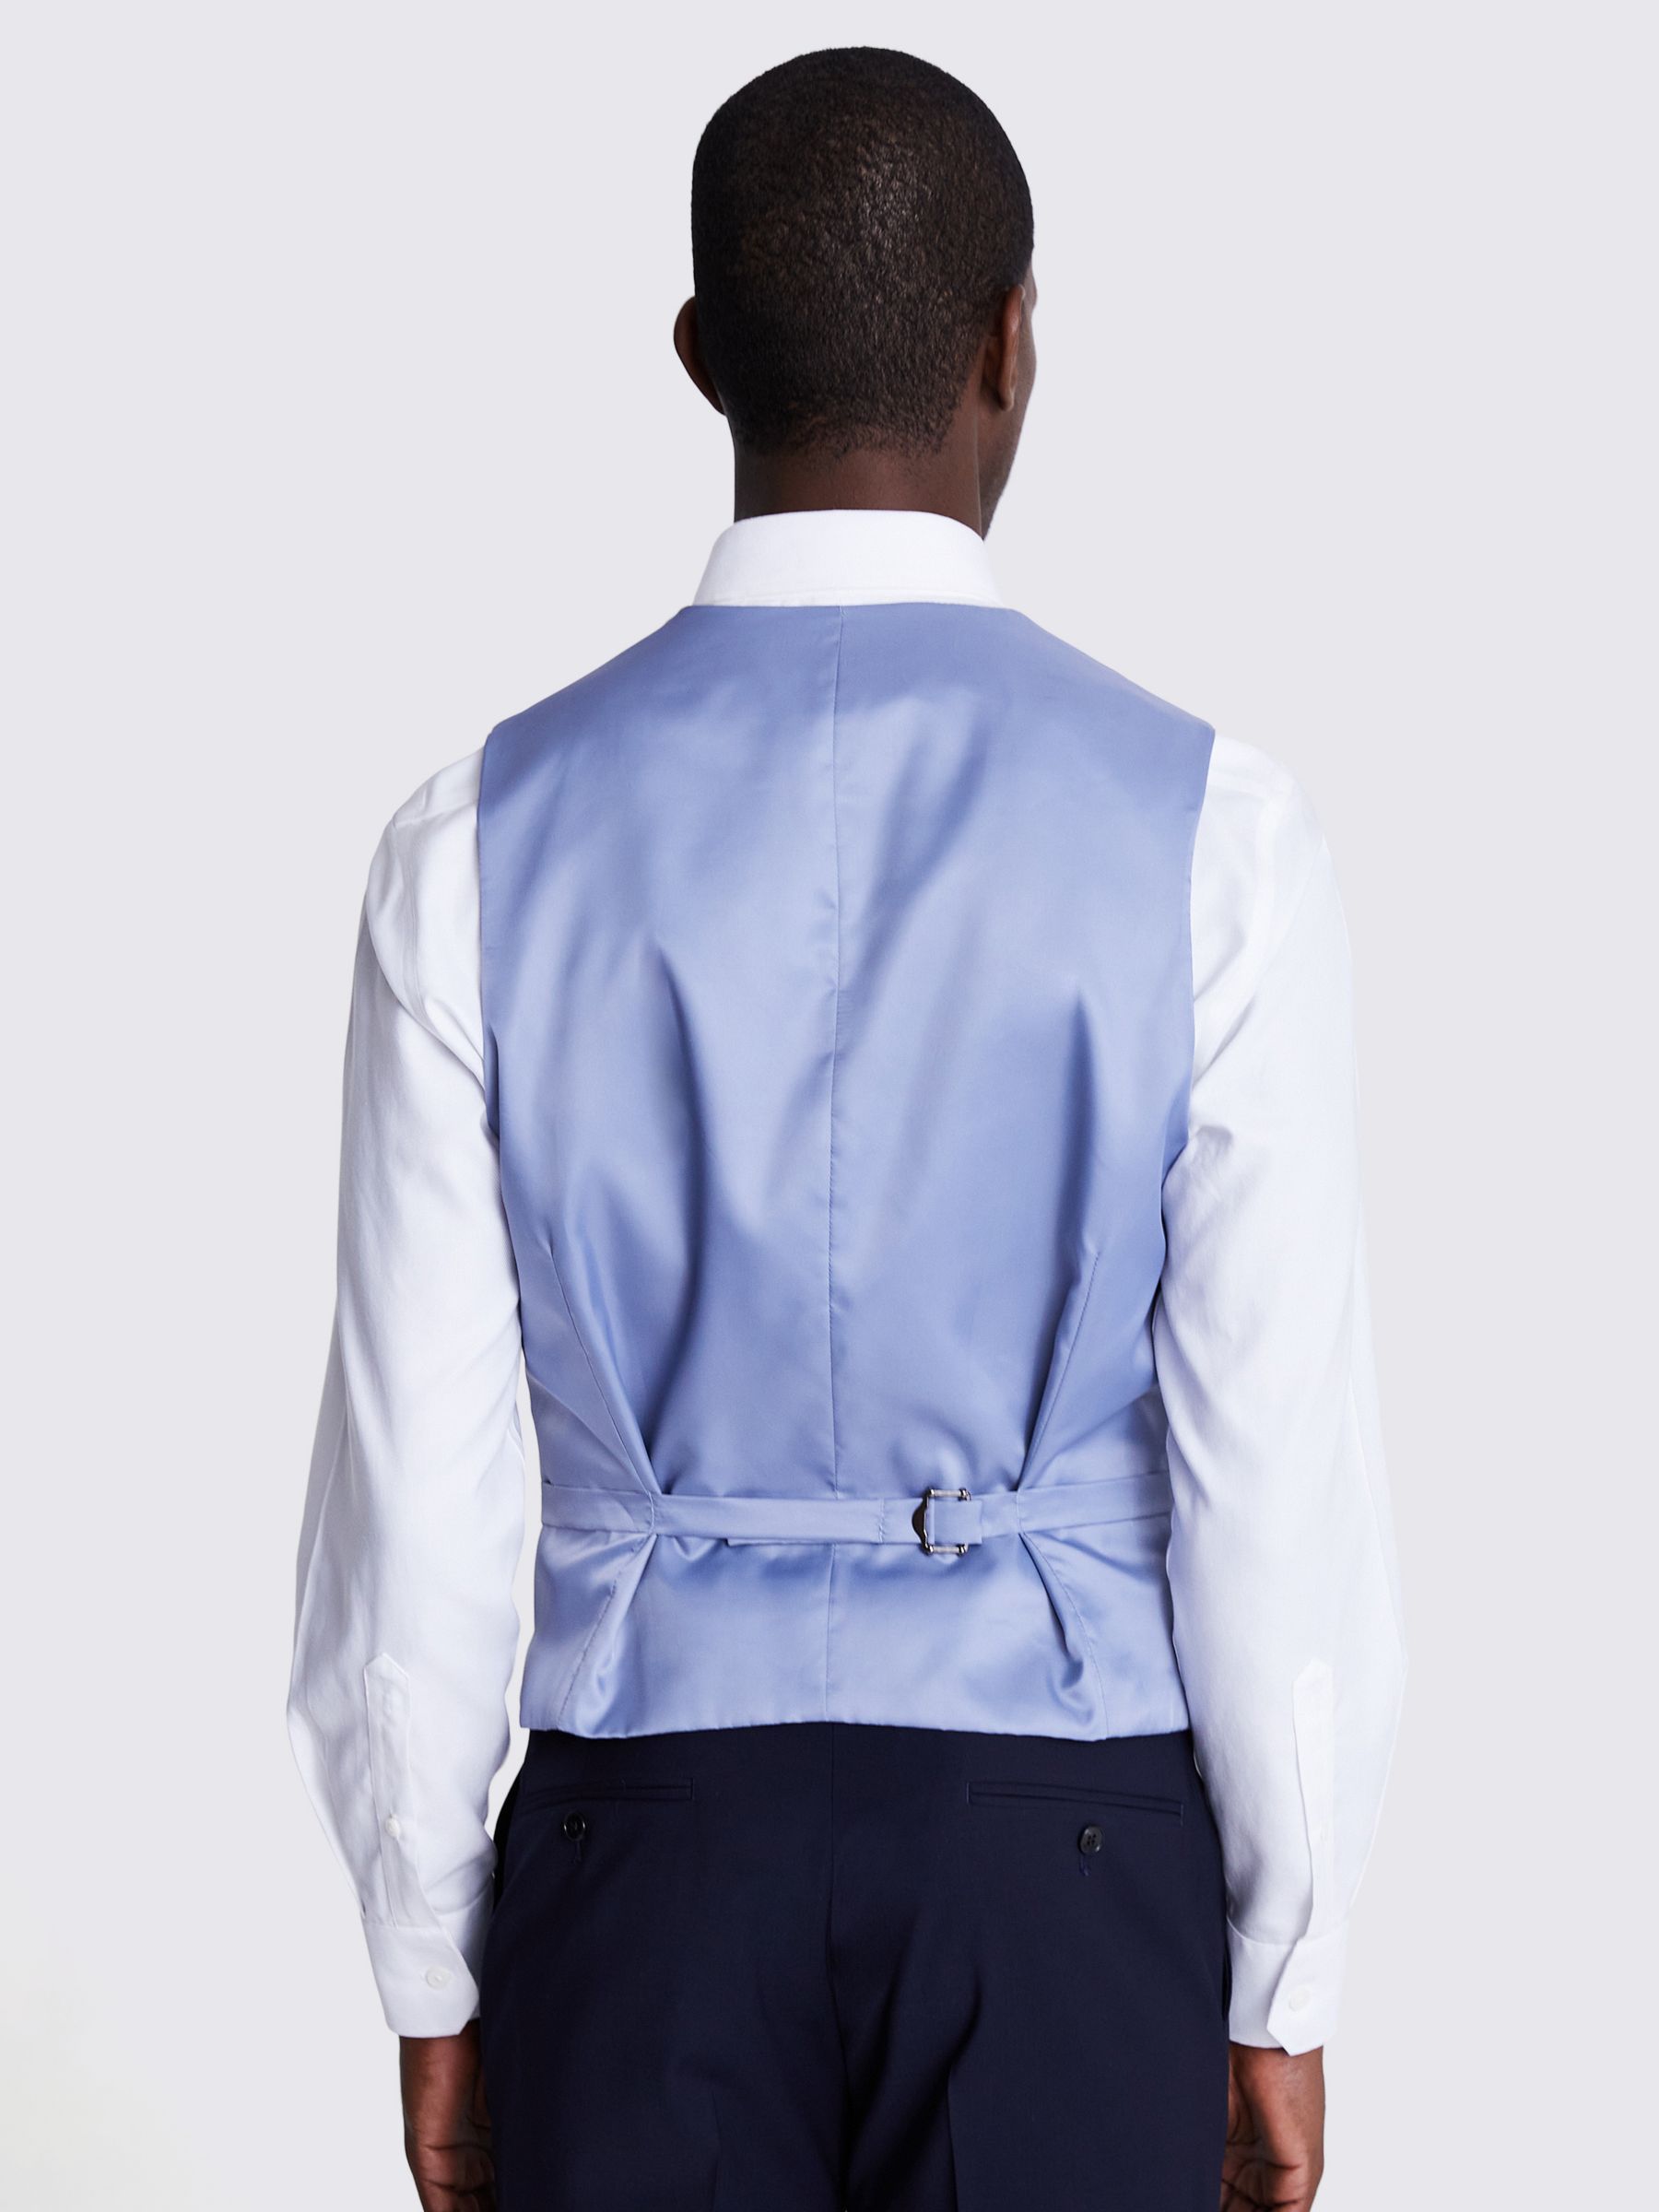 Buy Moss 1851 Performance Tailored Fit Wool Blend Waistcoat Online at johnlewis.com